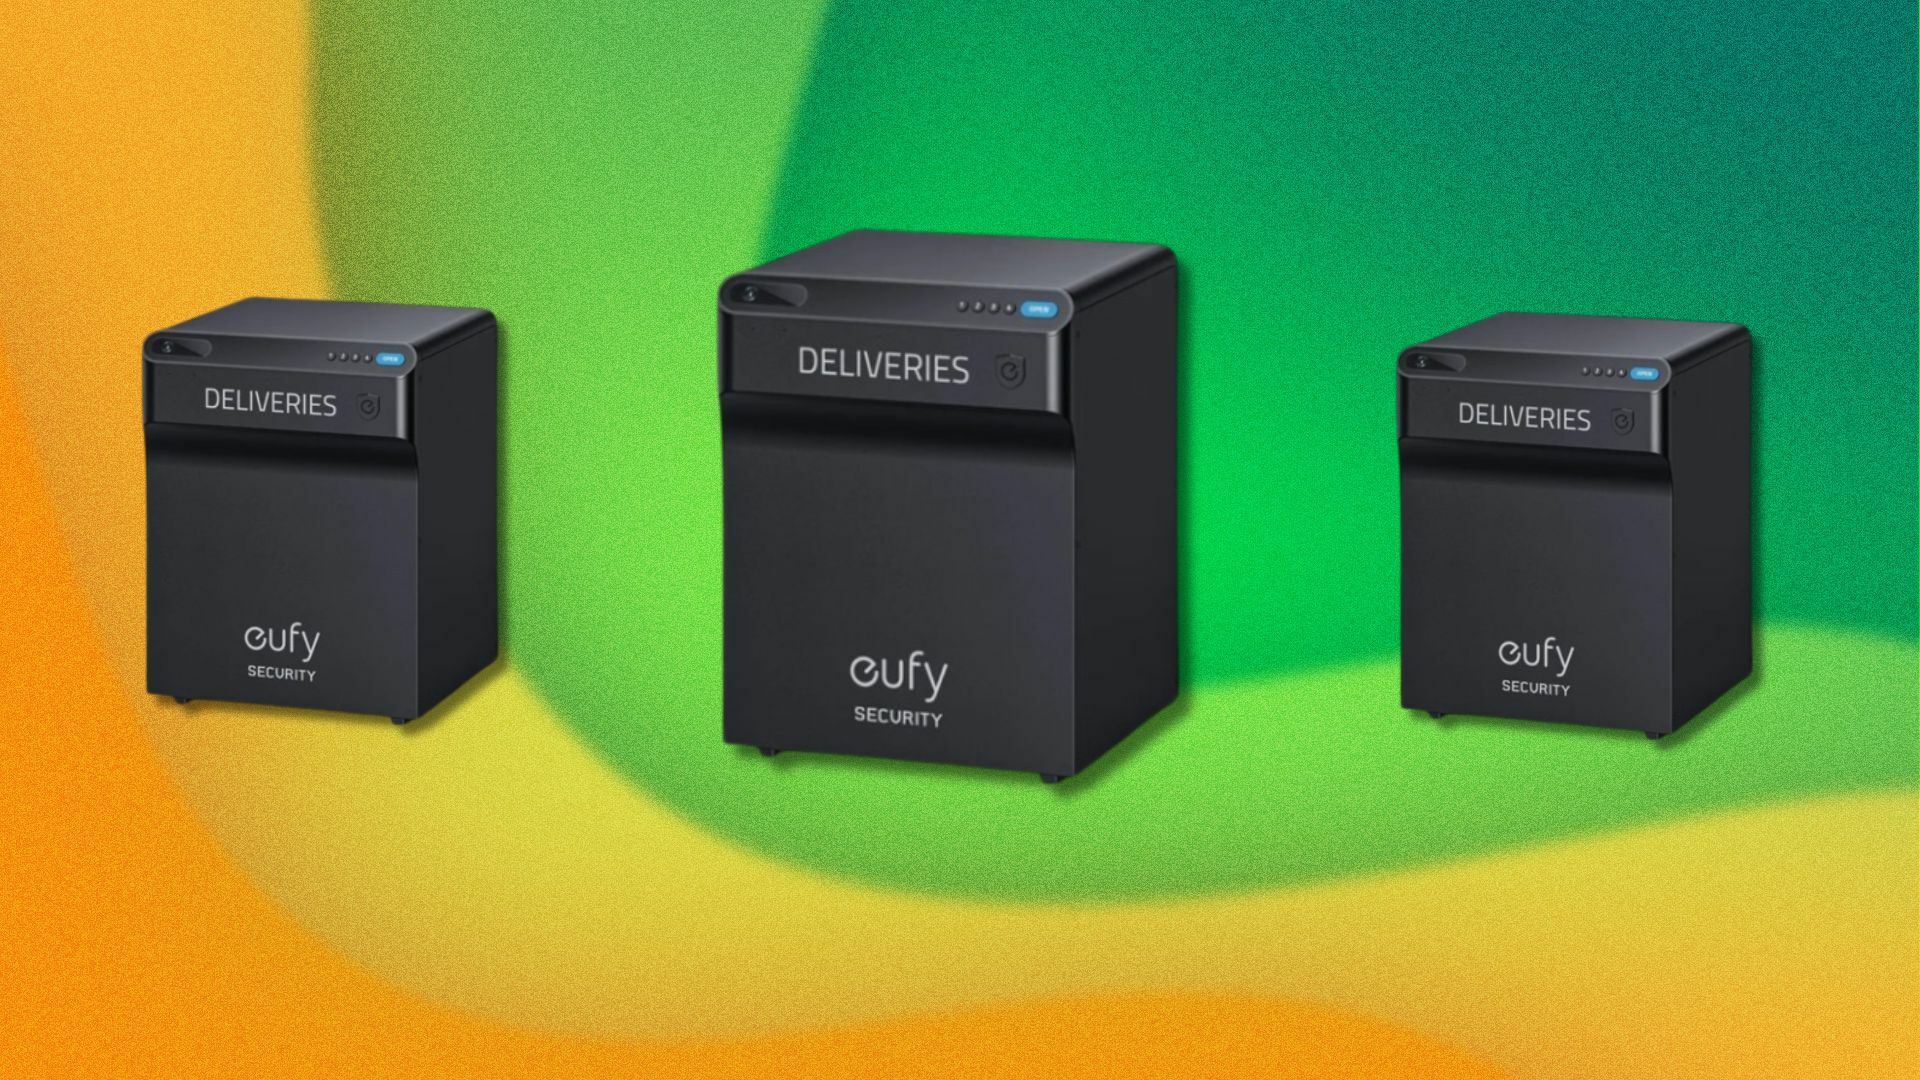 three eufy security smartbrop boxes on a green and yellow wavy background